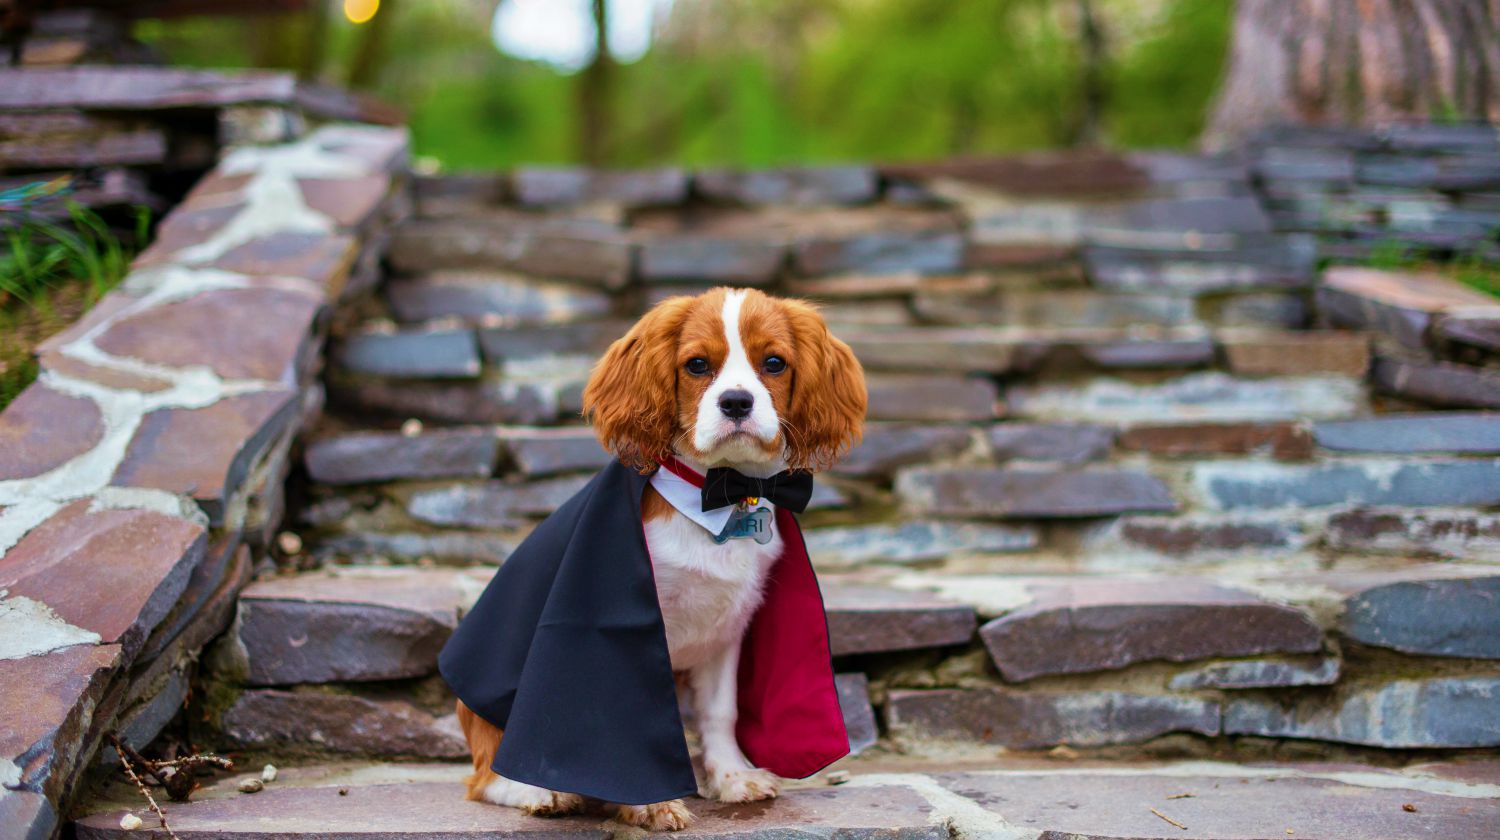 Cute puppy dracula | DIY Dog Costume Ideas + QUIZ: What's Your Dog's Costume Personality | Featured